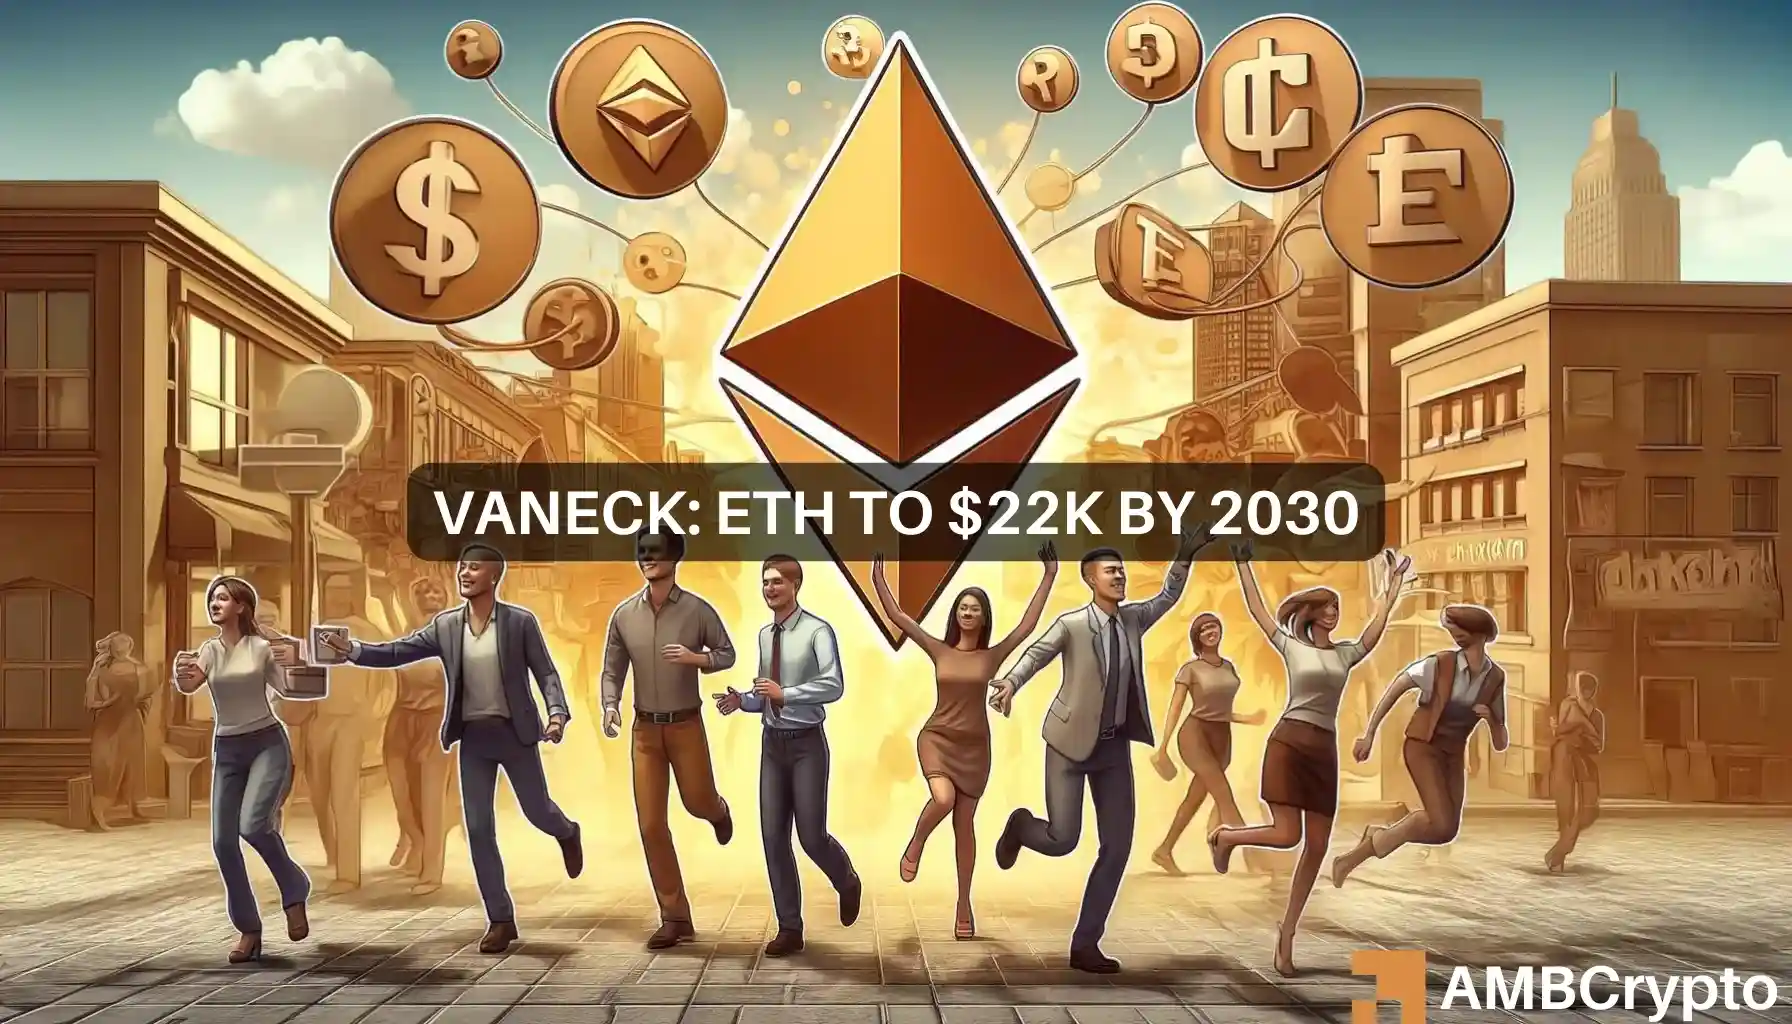 Ethereum price to hit $22,000 by 2030: VanEck predicts